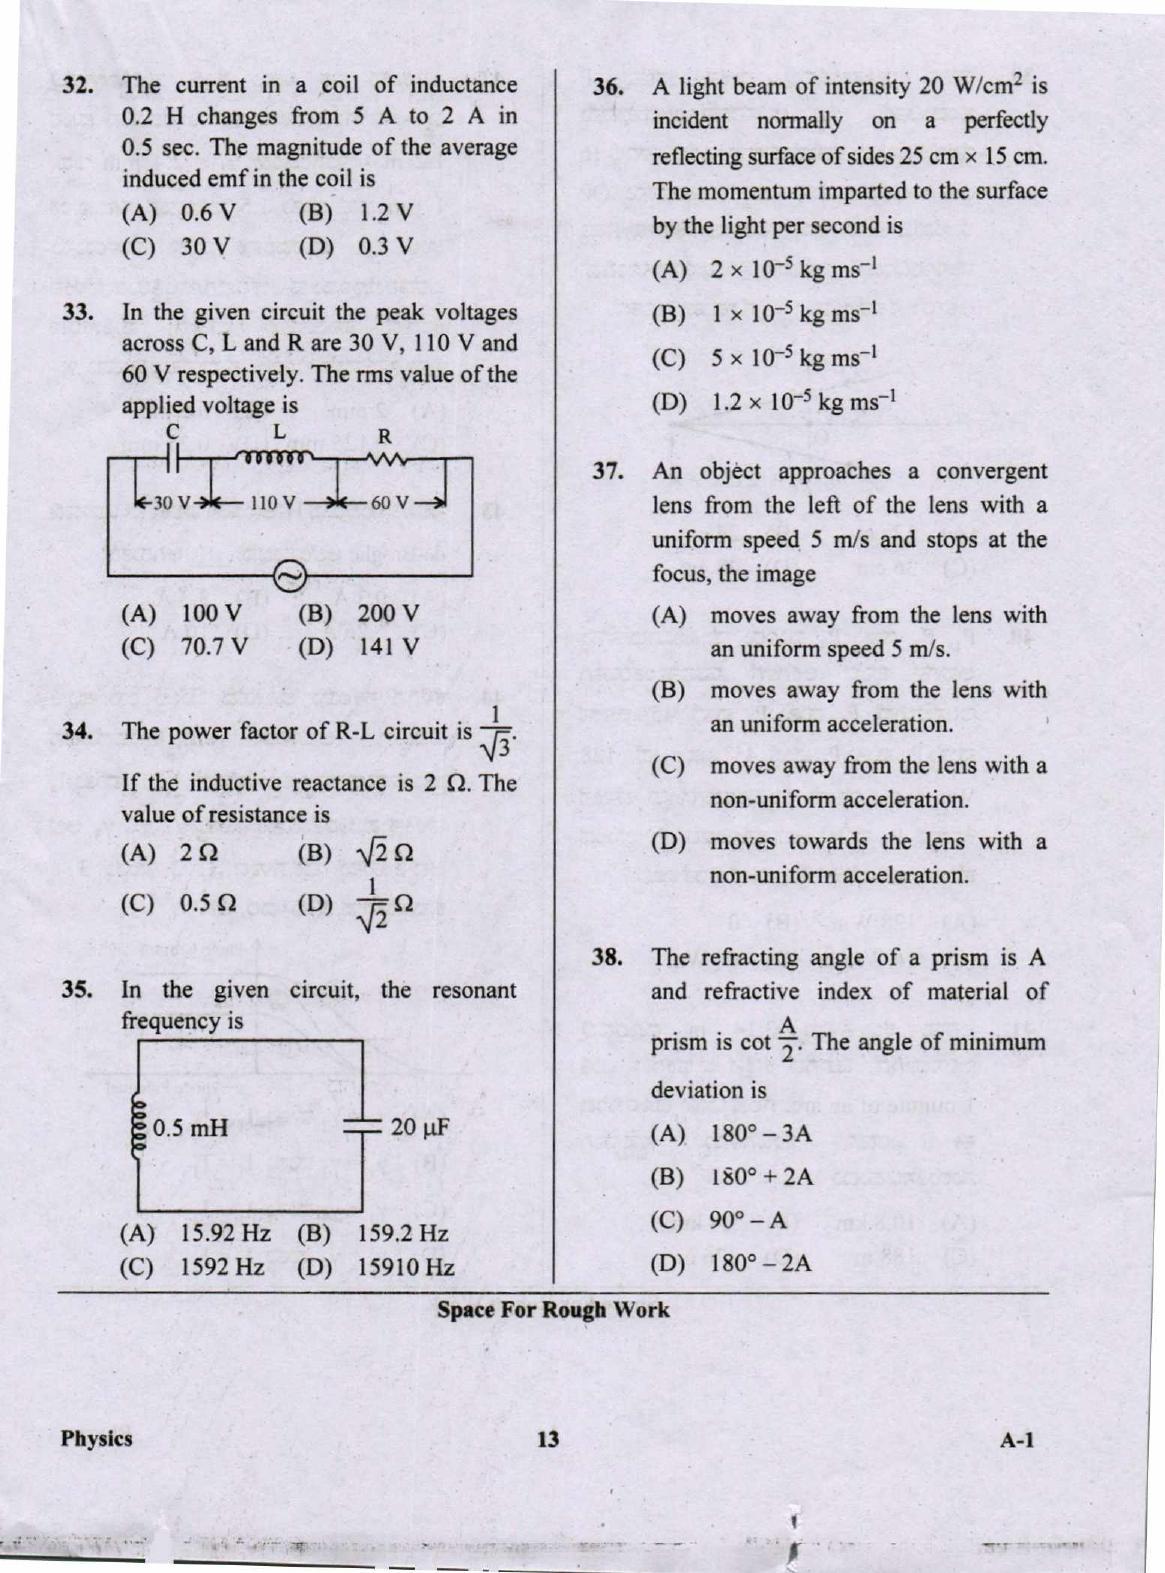 KCET Physics 2020 Question Papers - Page 13